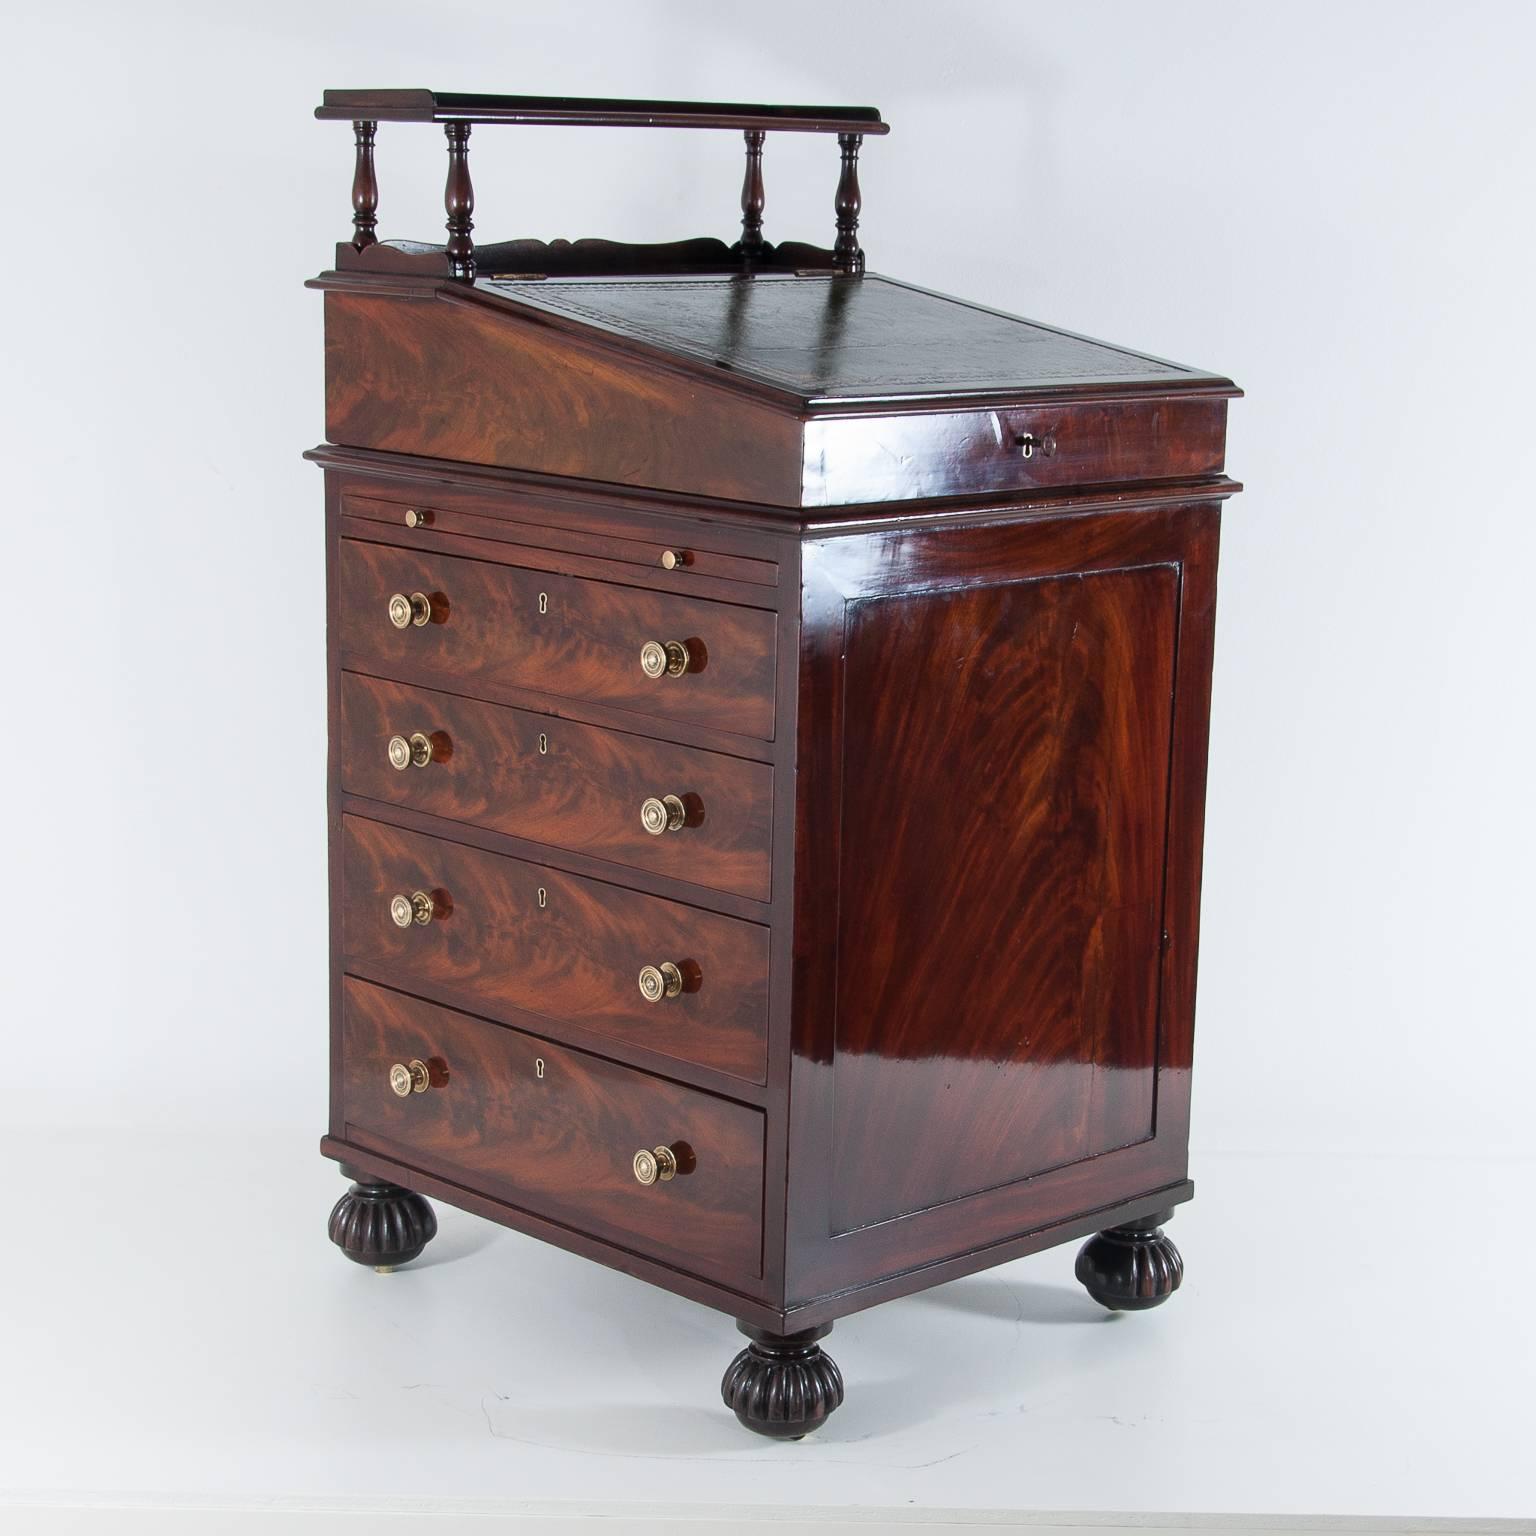 Late Regency mahogany Davenport made to a Gillows design, the top with turned spindled gallery, pull-out pen drawer, sloping hinged fall inset with leather writing surface, interior fitted with two working drawers and two dummy drawers, the whole